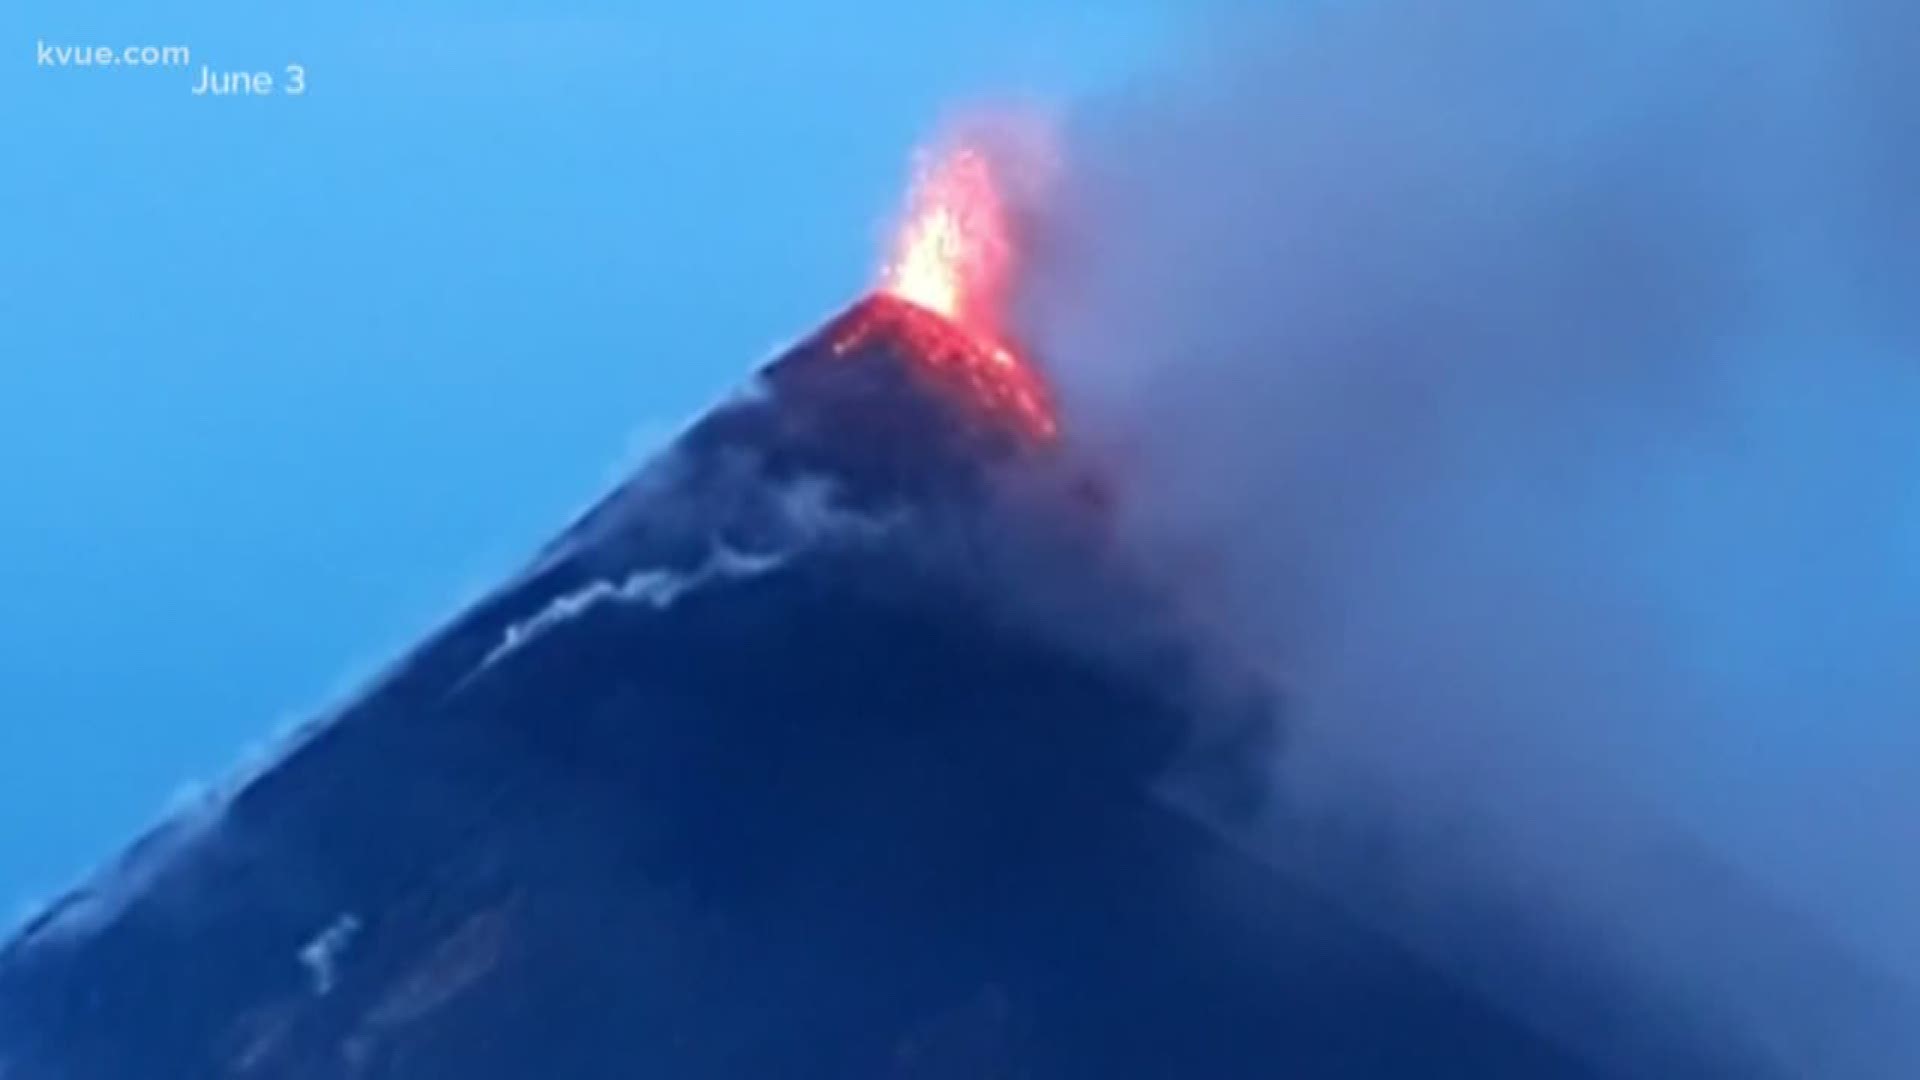 It's been a week since a volcano in Guatemala erupted, killing more than 100 people. One Austin woman is doing what she can here to help people recover.